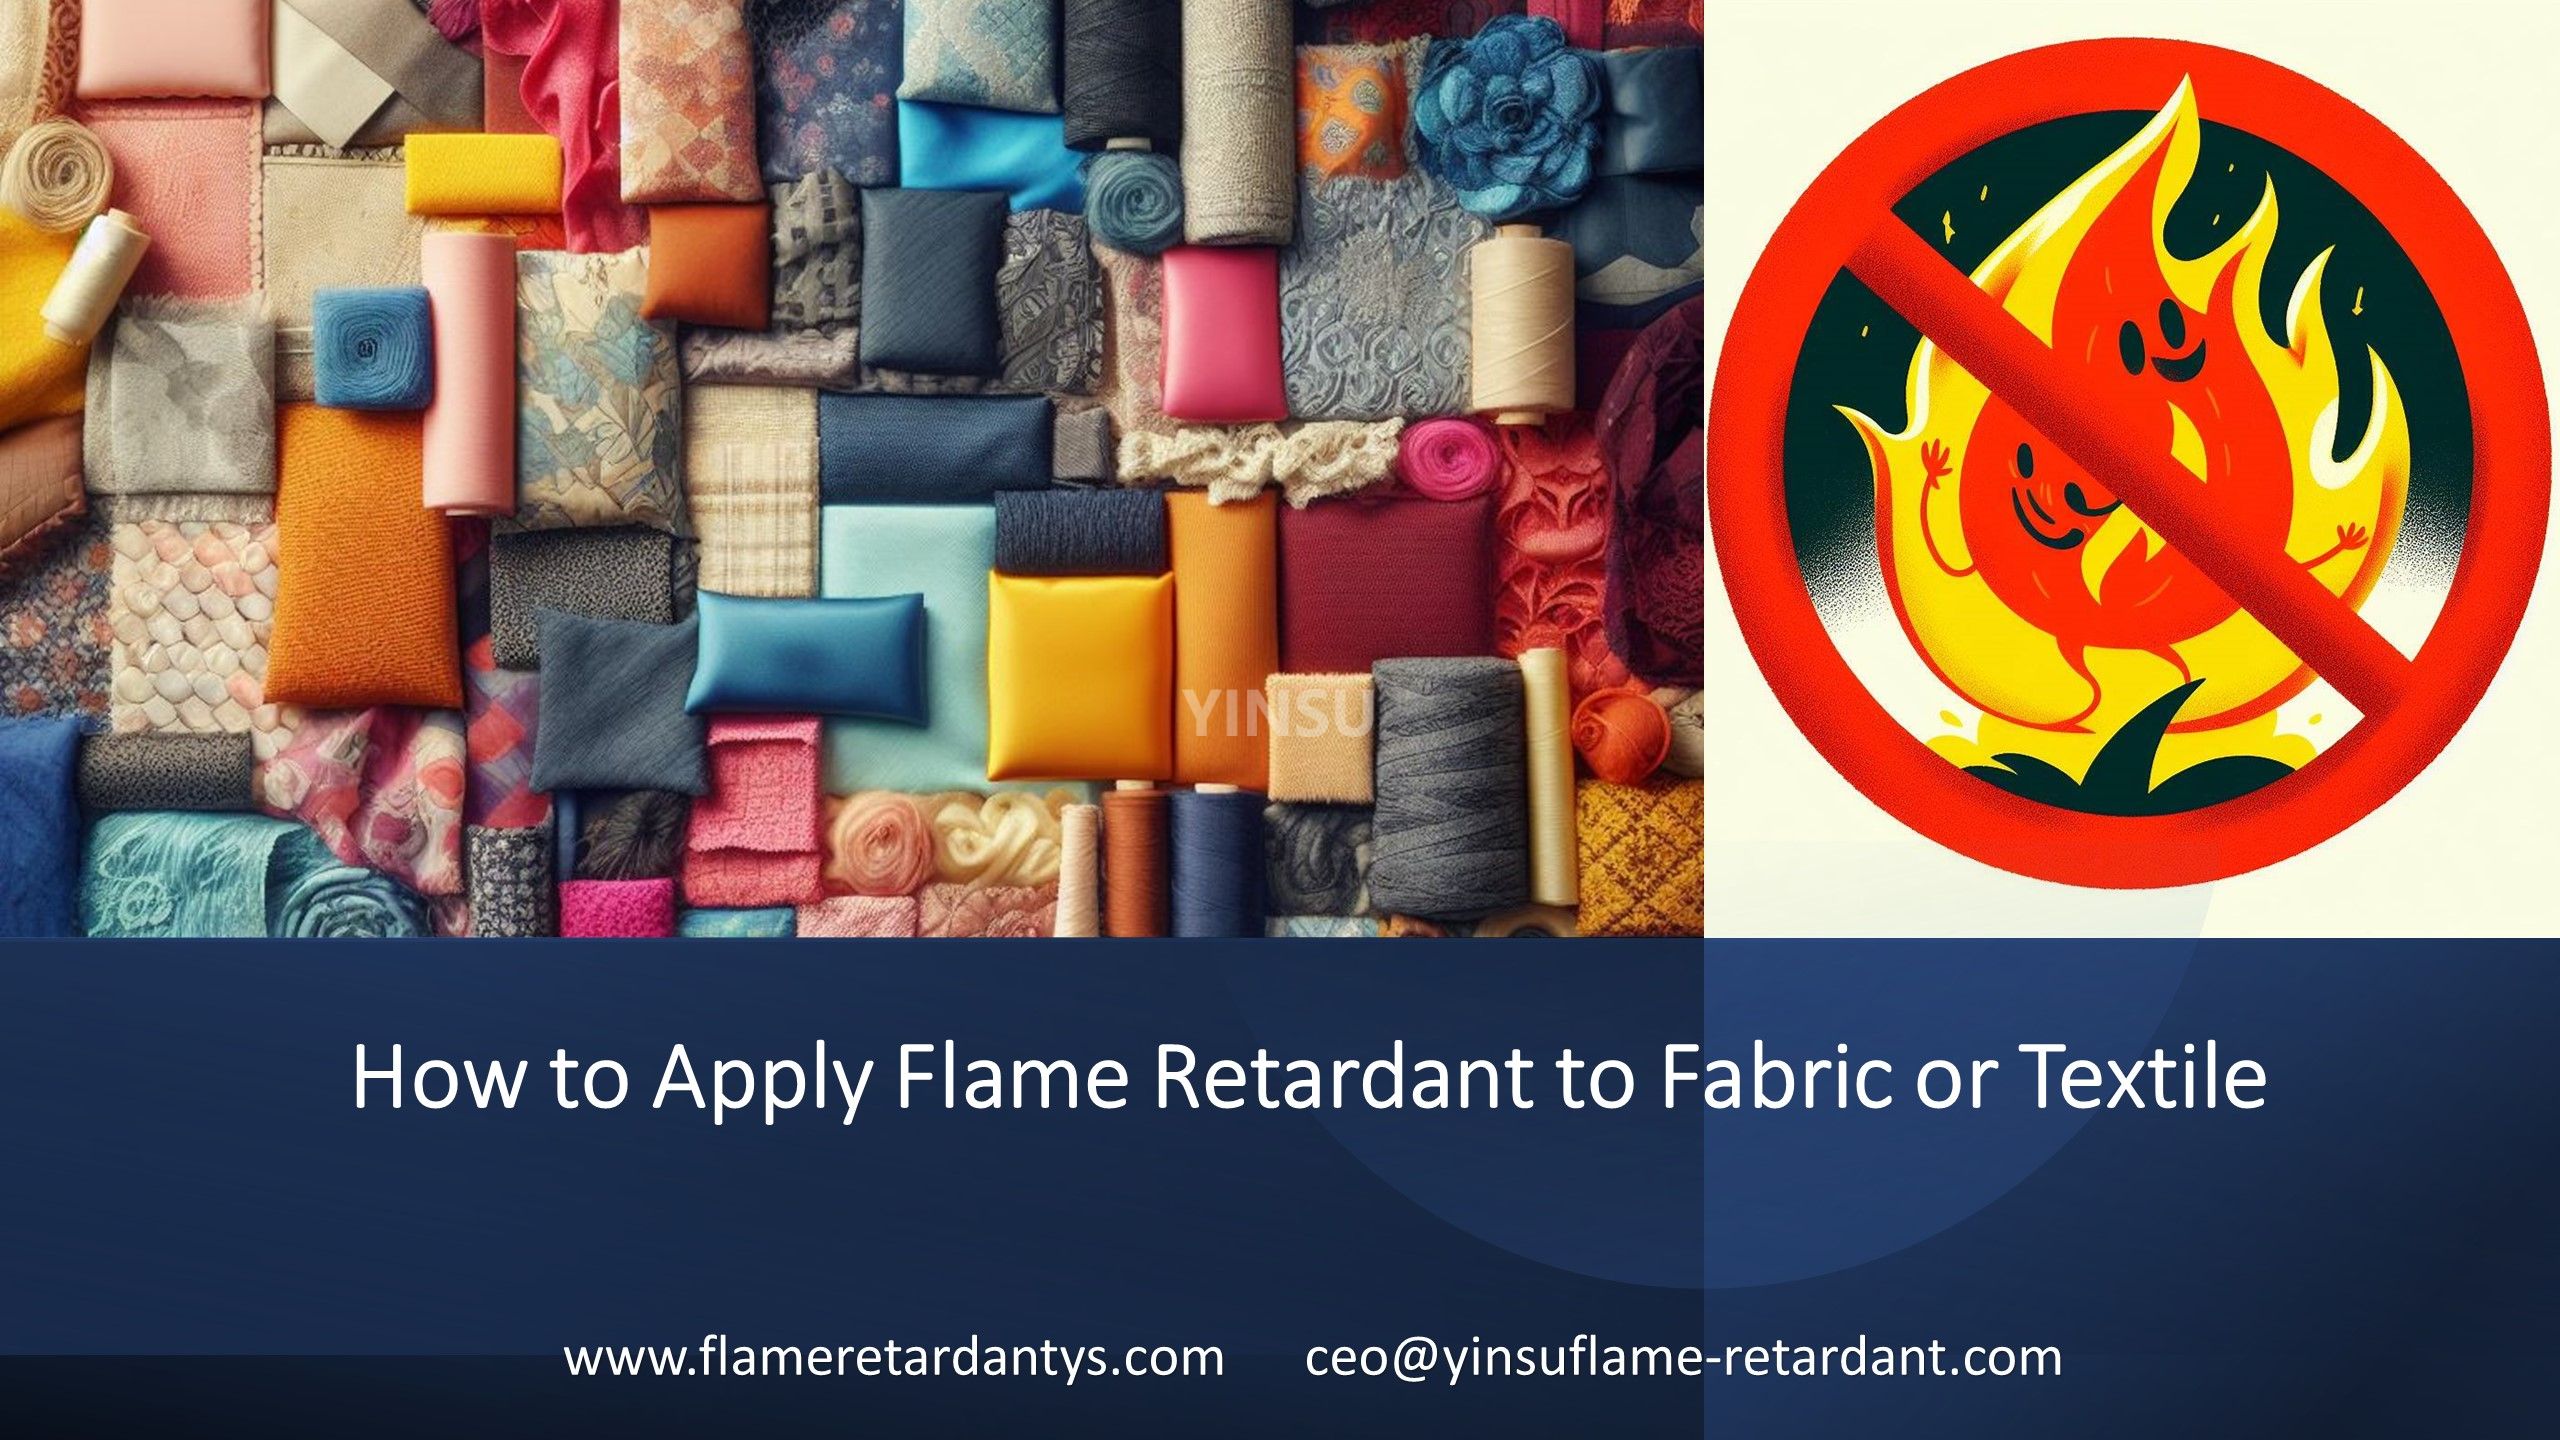 How to Apply Flame Retardant to Fabric or Textile